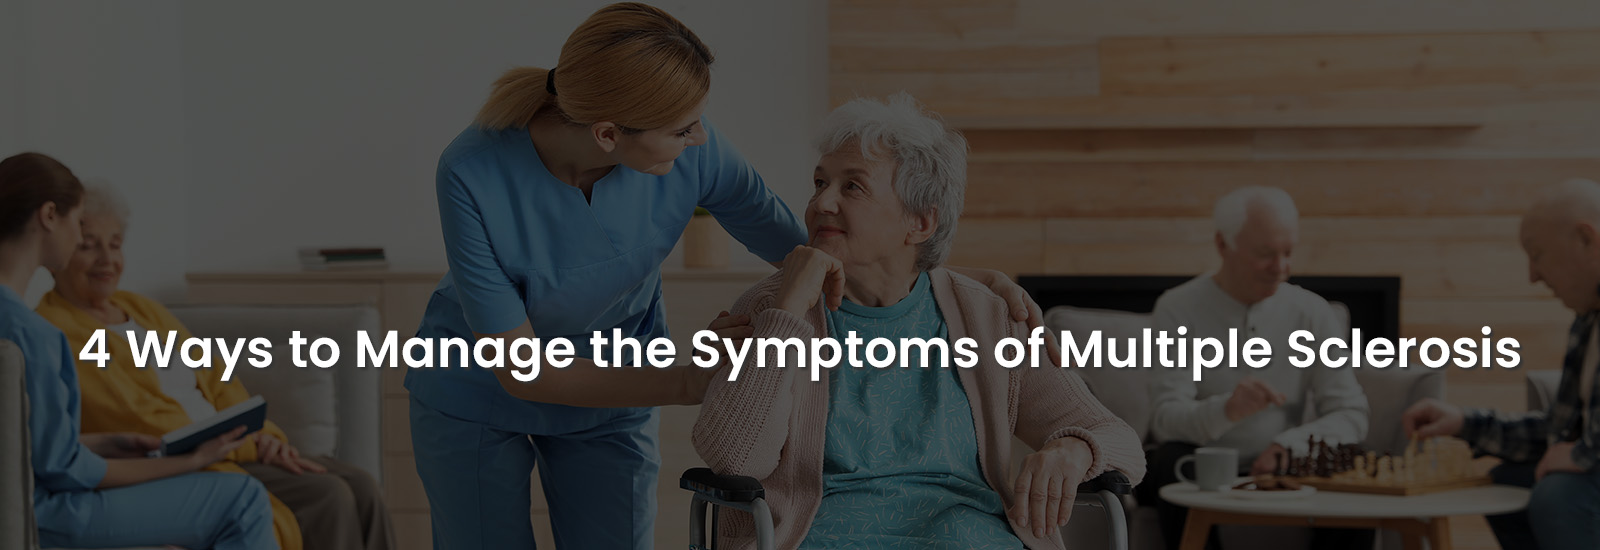 4 Ways to Manage the Symptoms of Multiple Sclerosis | Banner Image